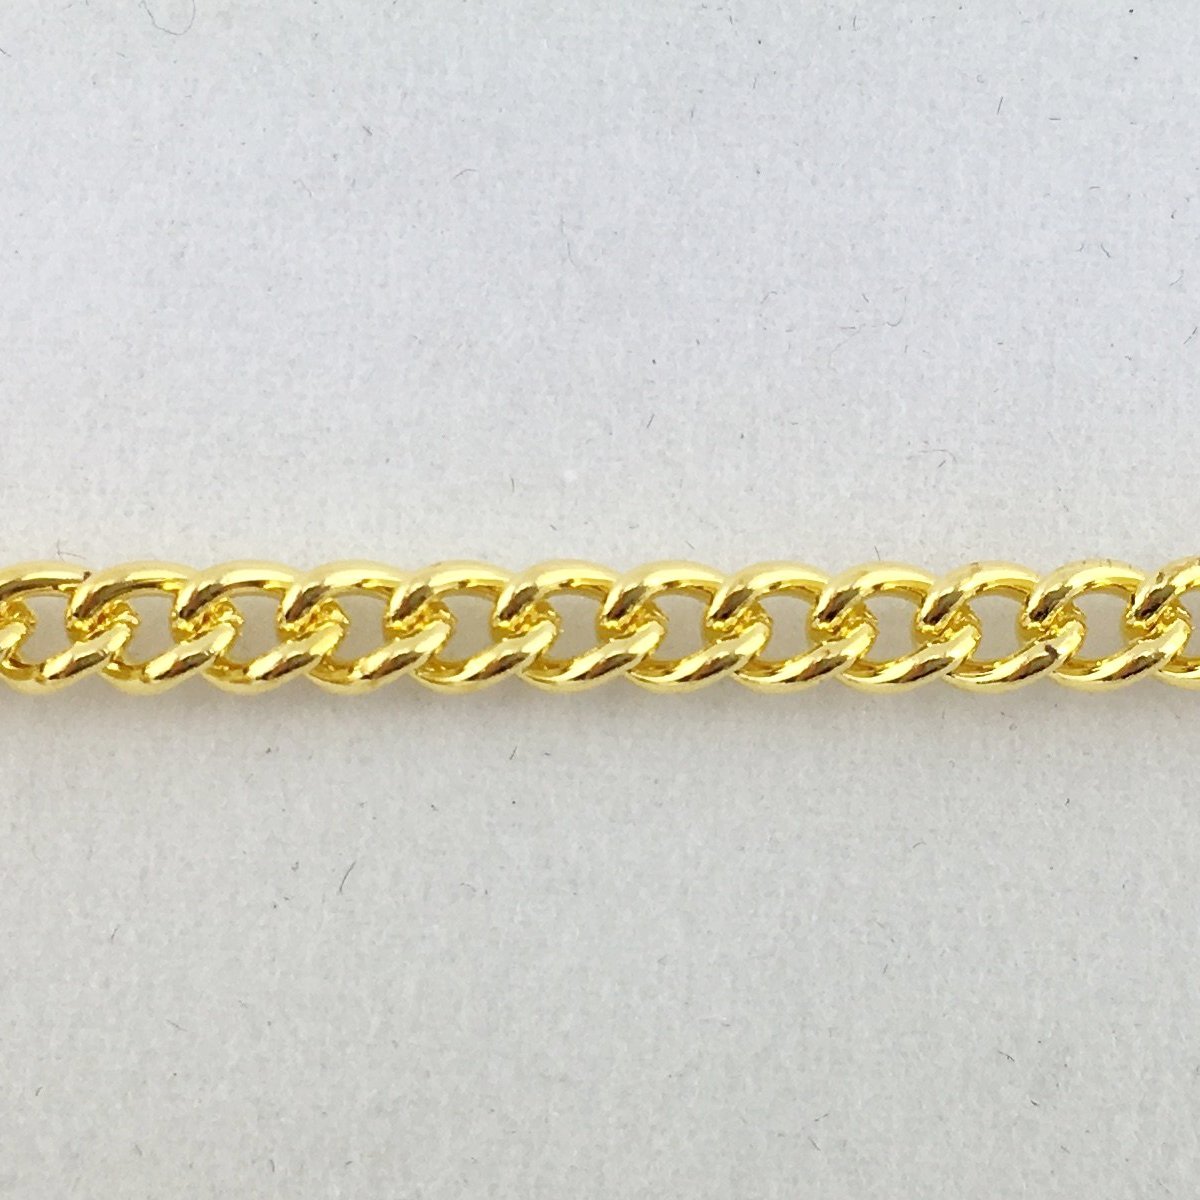 Curb jewellery chain in a gold-plated finish, size: C220, quantity: 25 metres. Australia wide delivery